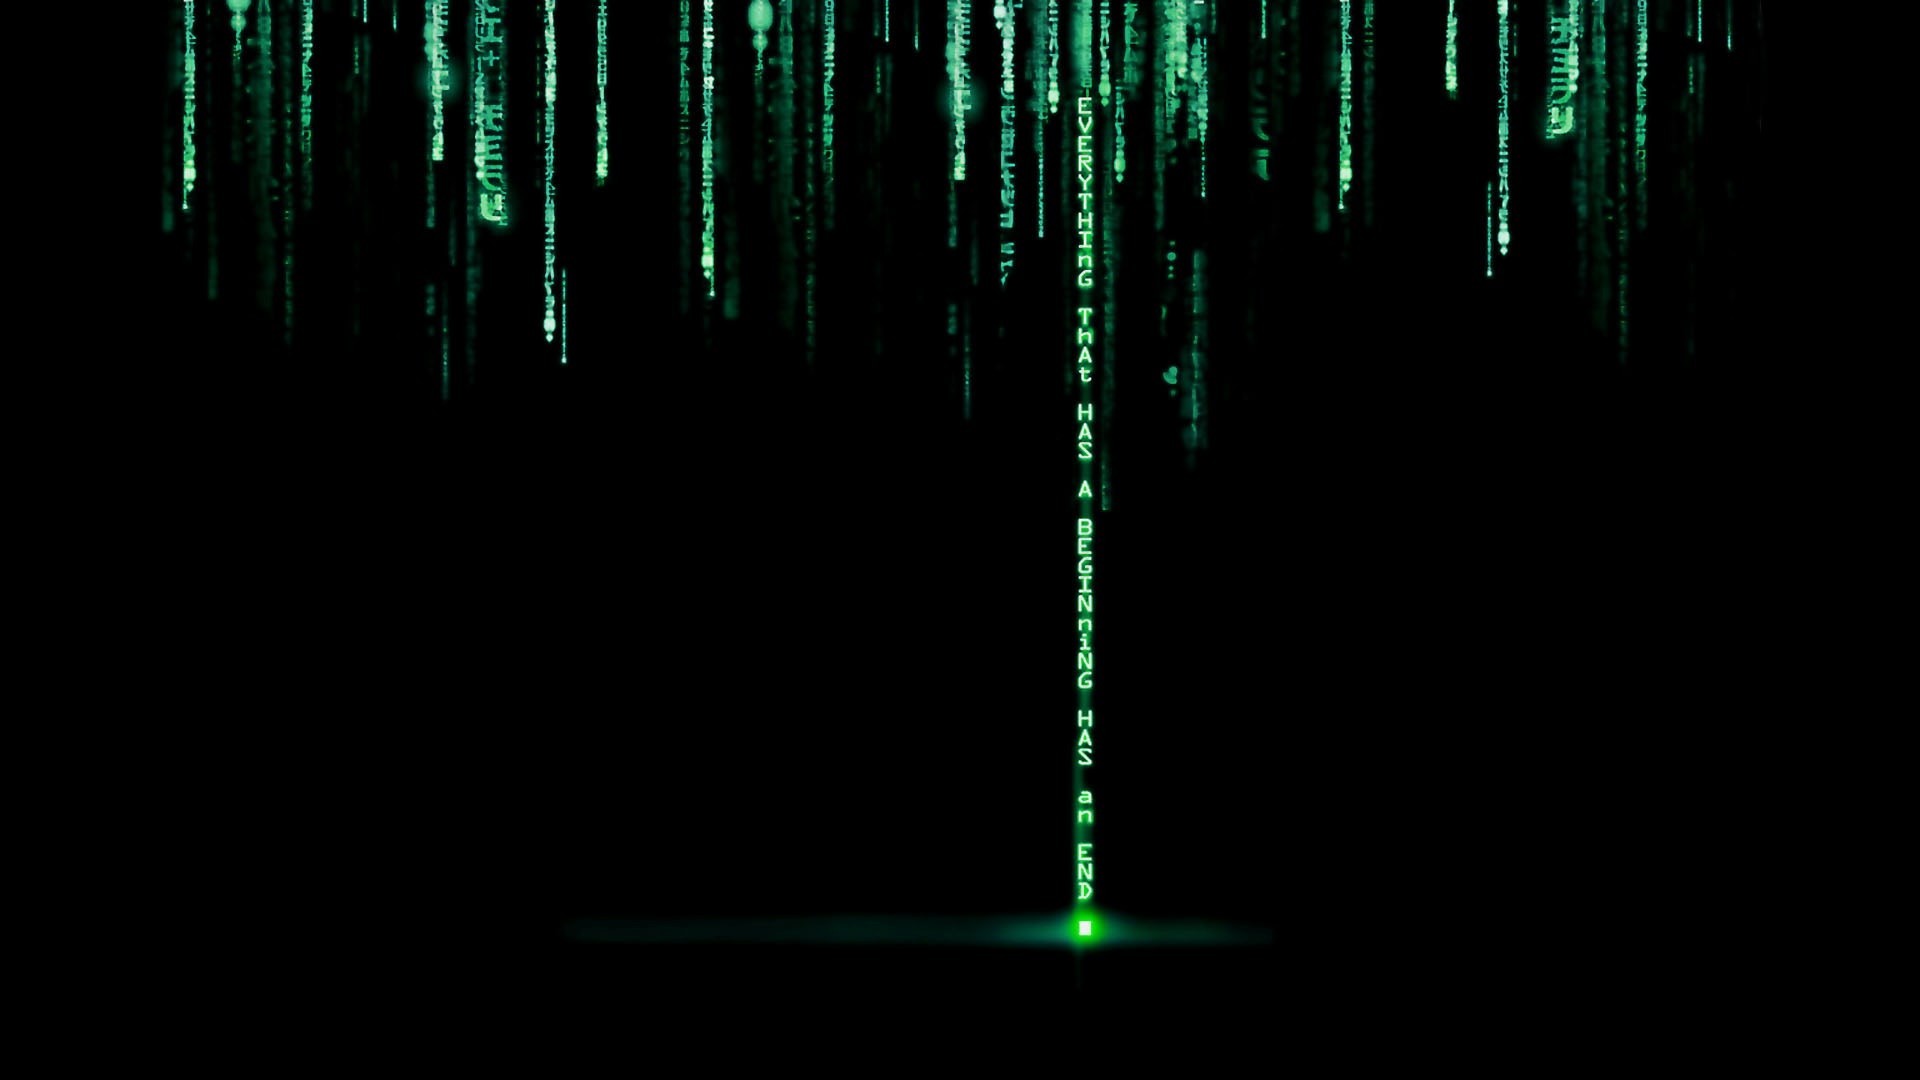 Matrix background ·① Download free amazing backgrounds for desktop, mobile, laptop in any ...